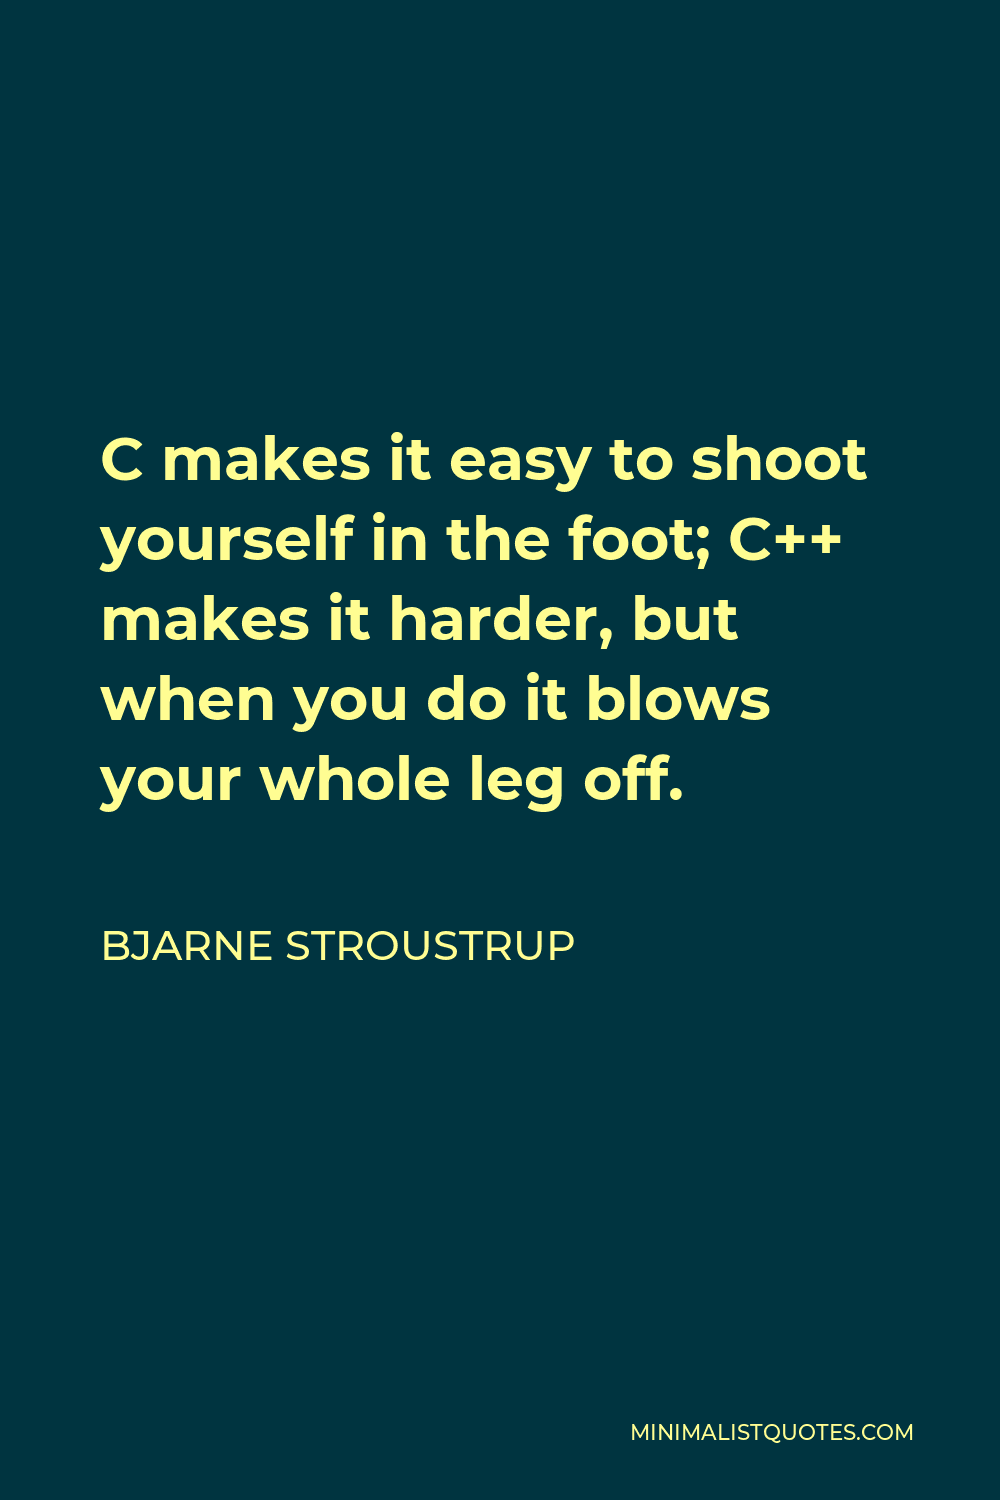 Bjarne Stroustrup Quote - C makes it easy to shoot yourself in the foot; C++ makes it harder, but when you do it blows your whole leg off.